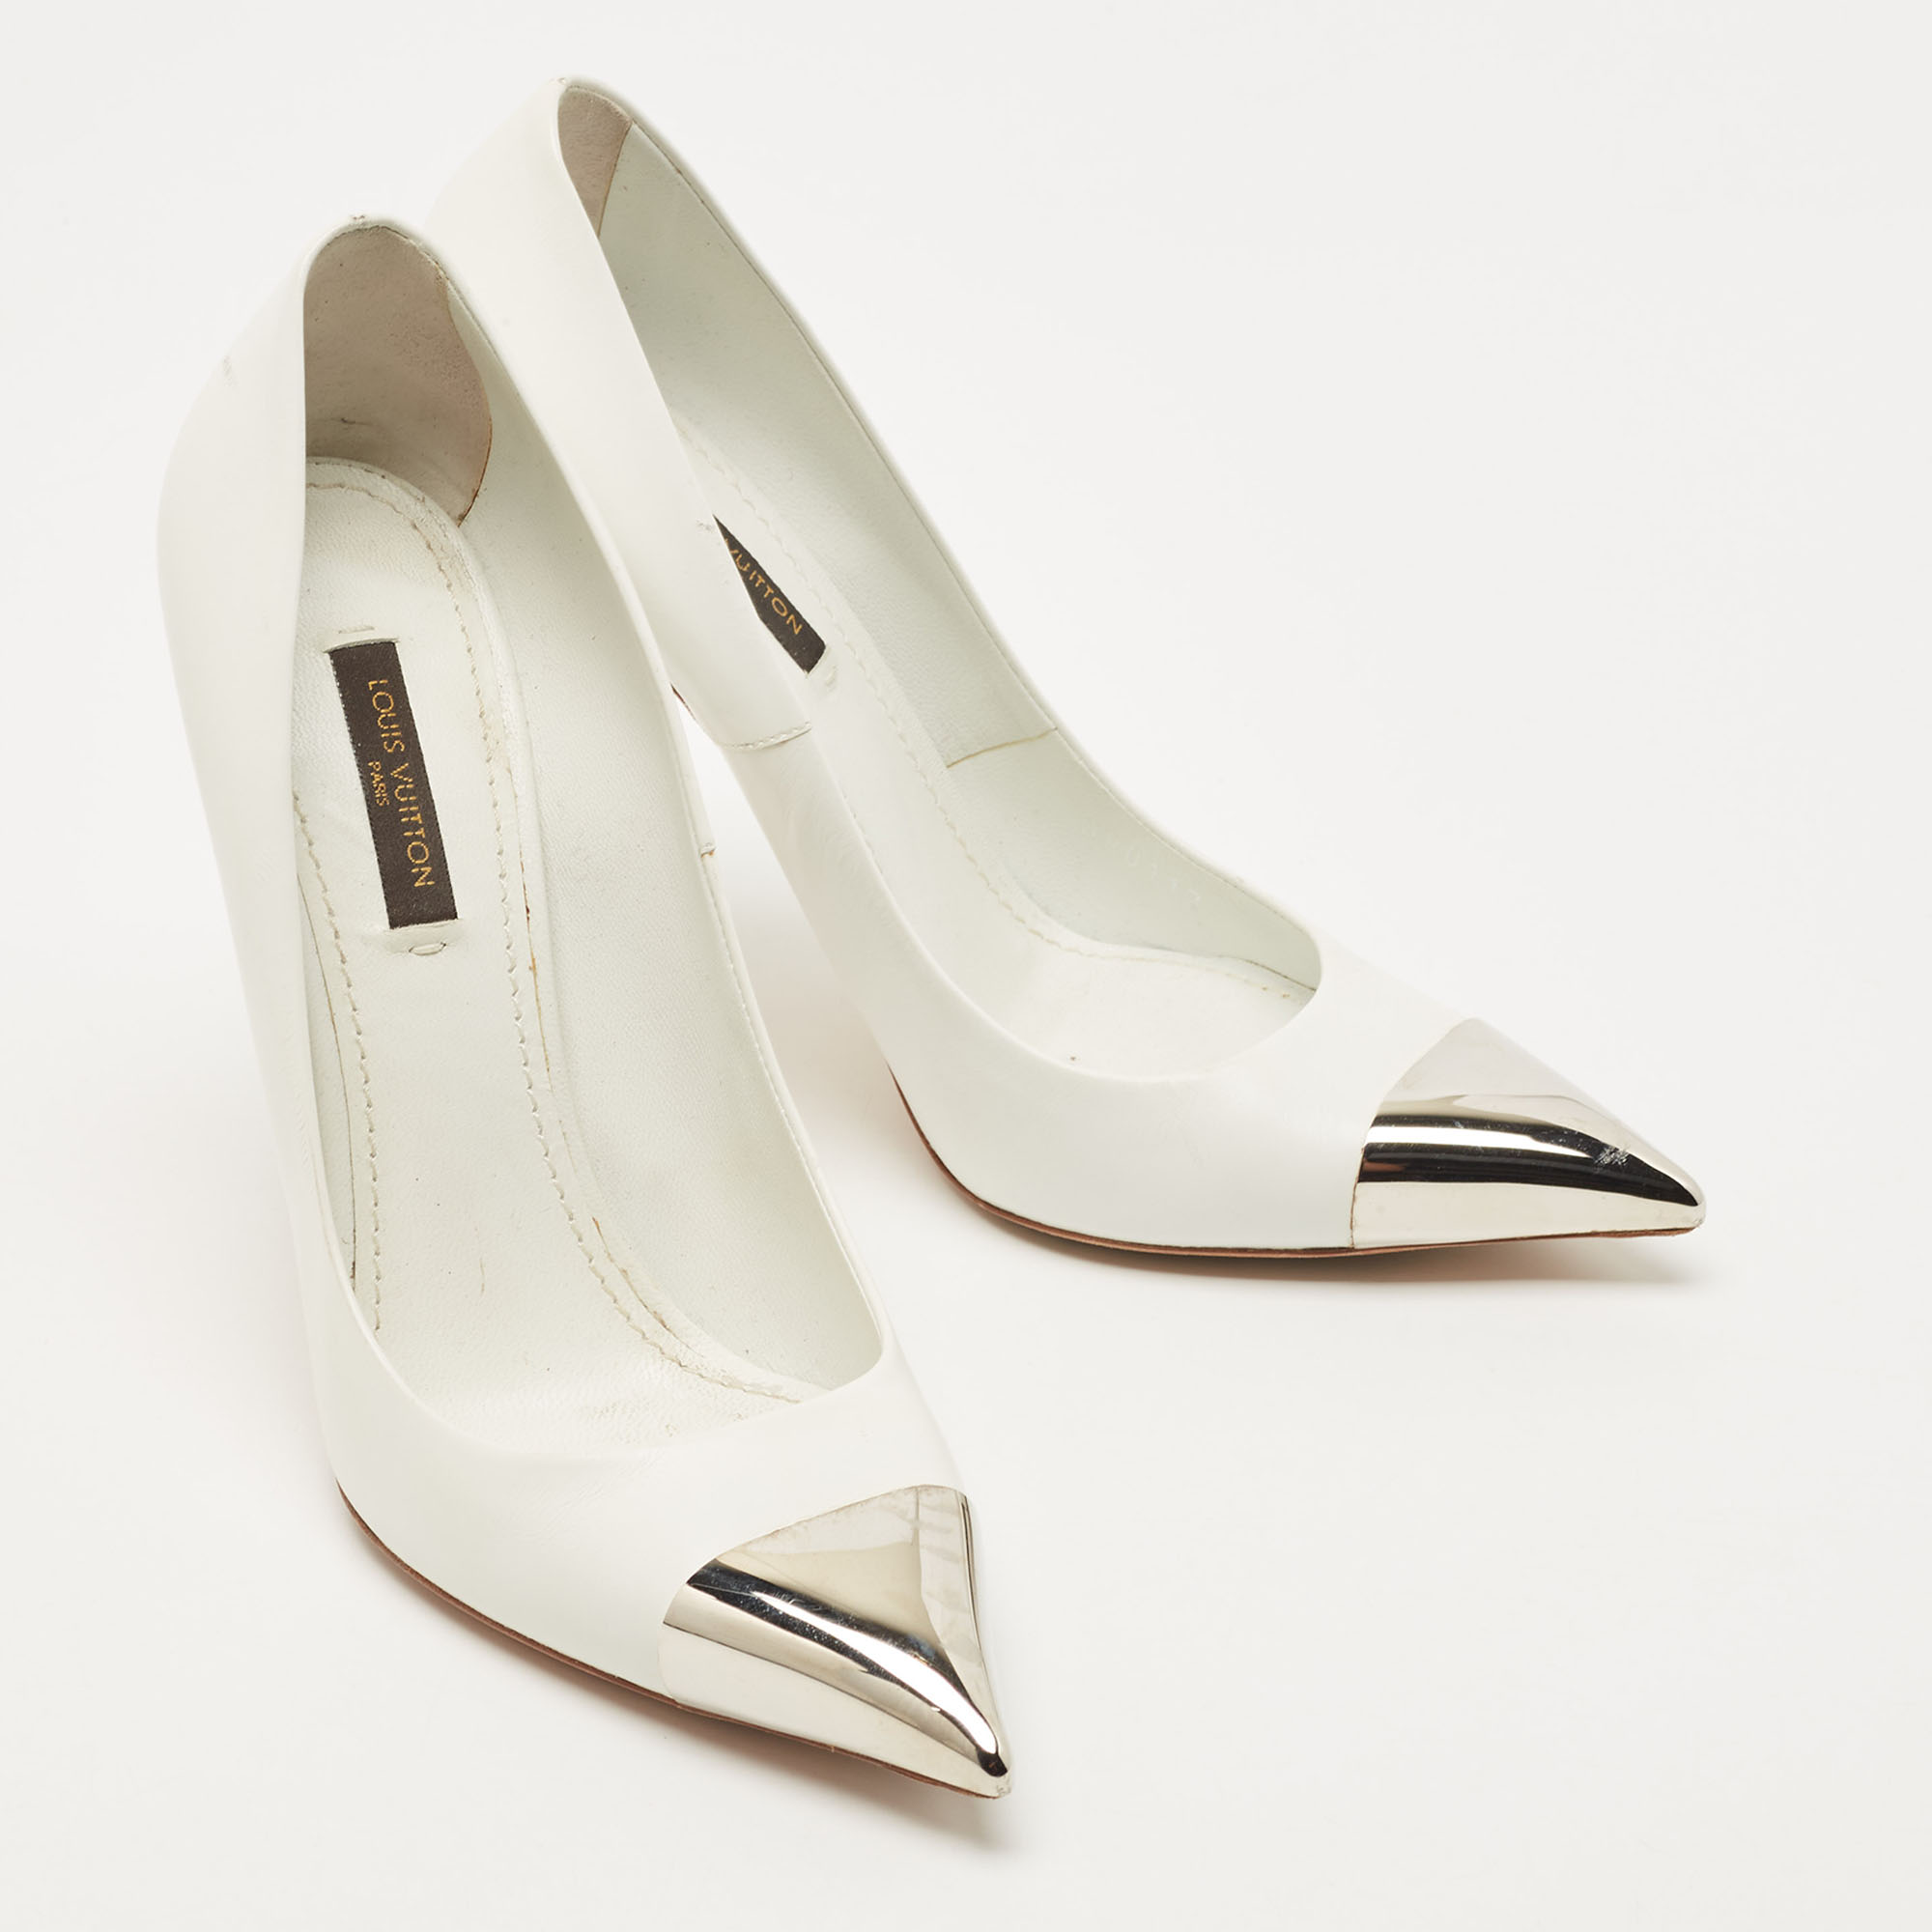 Louis Vuitton White Leather Pointed Toe Pumps Size 37.5